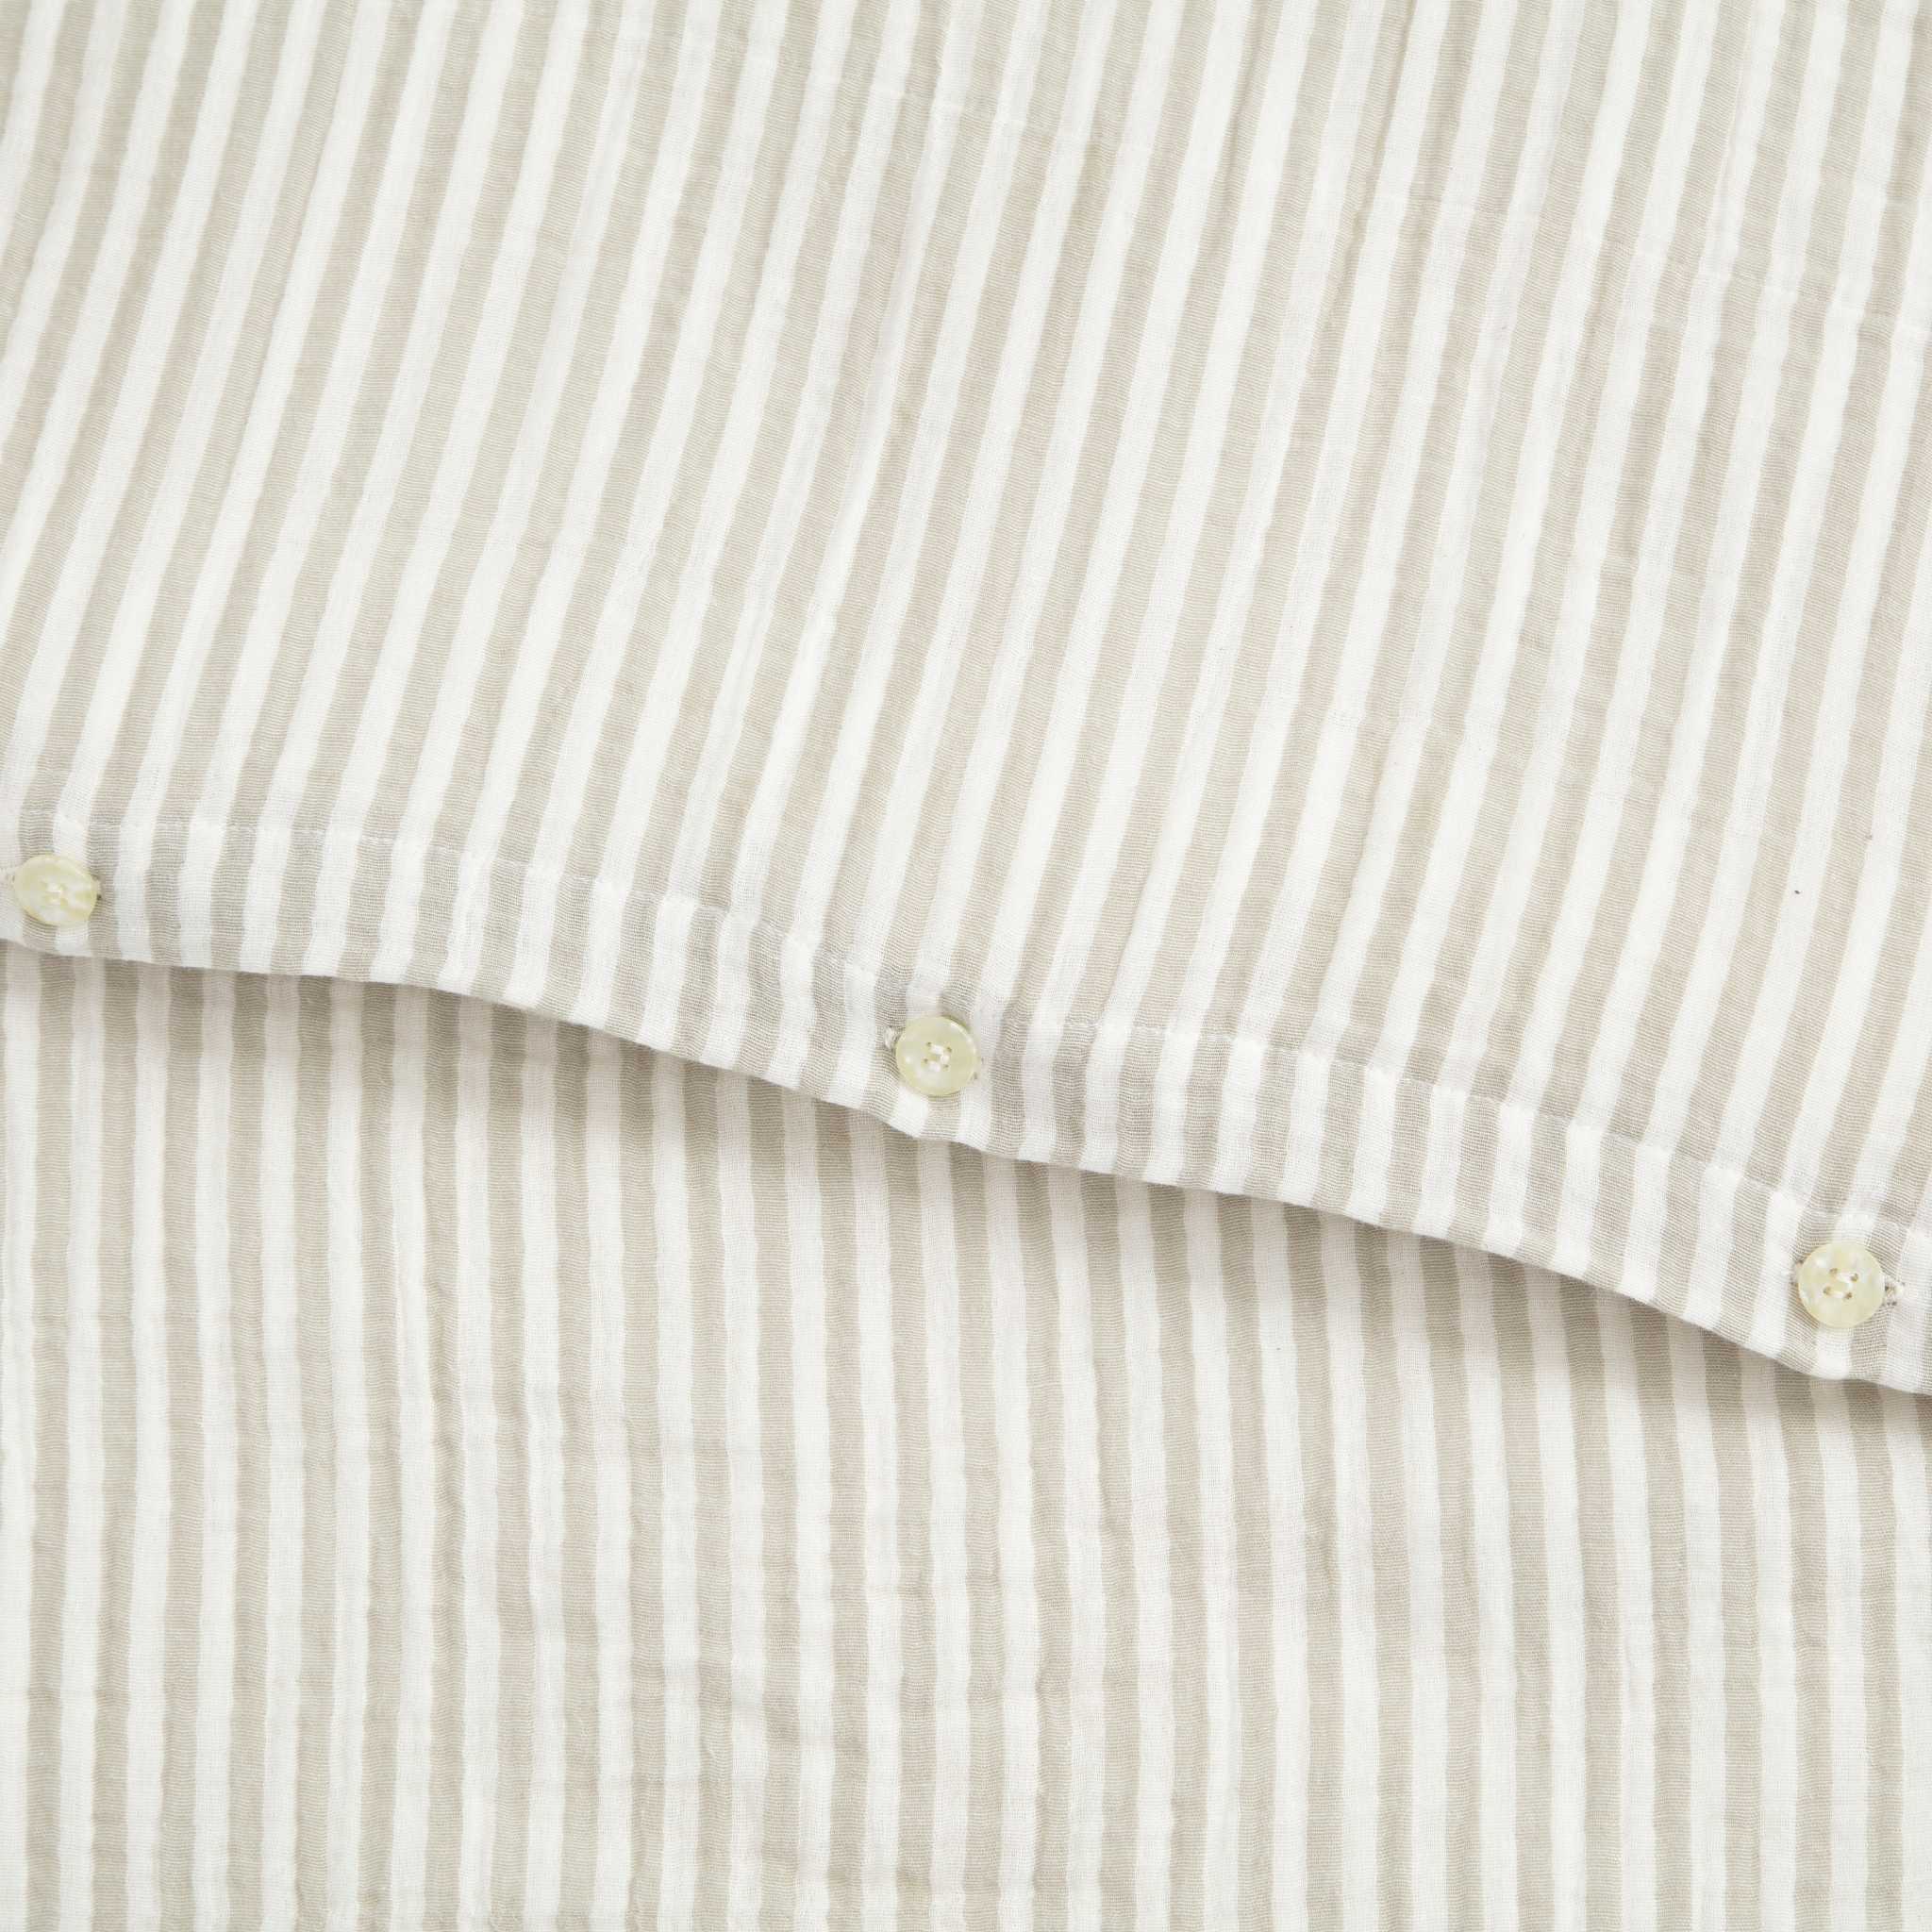 Garbo and Friends Stripe Anjou Toddler Muslin Bedding Set - Close Up Print And Button Detail